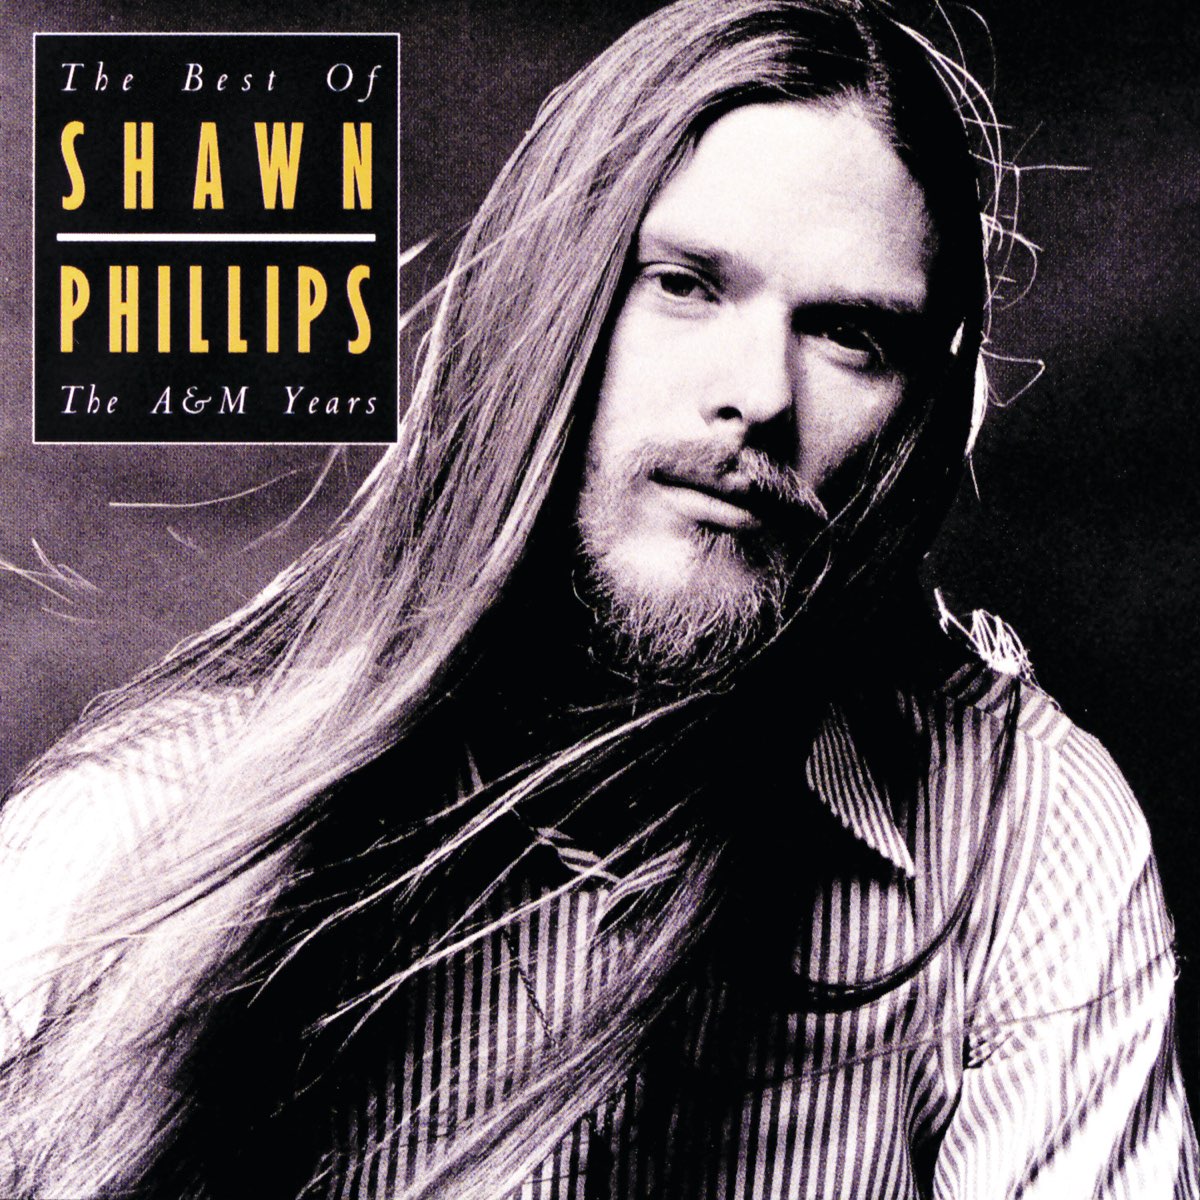 ‎The Best of Shawn Phillips The A&M Years Album by Shawn Phillips